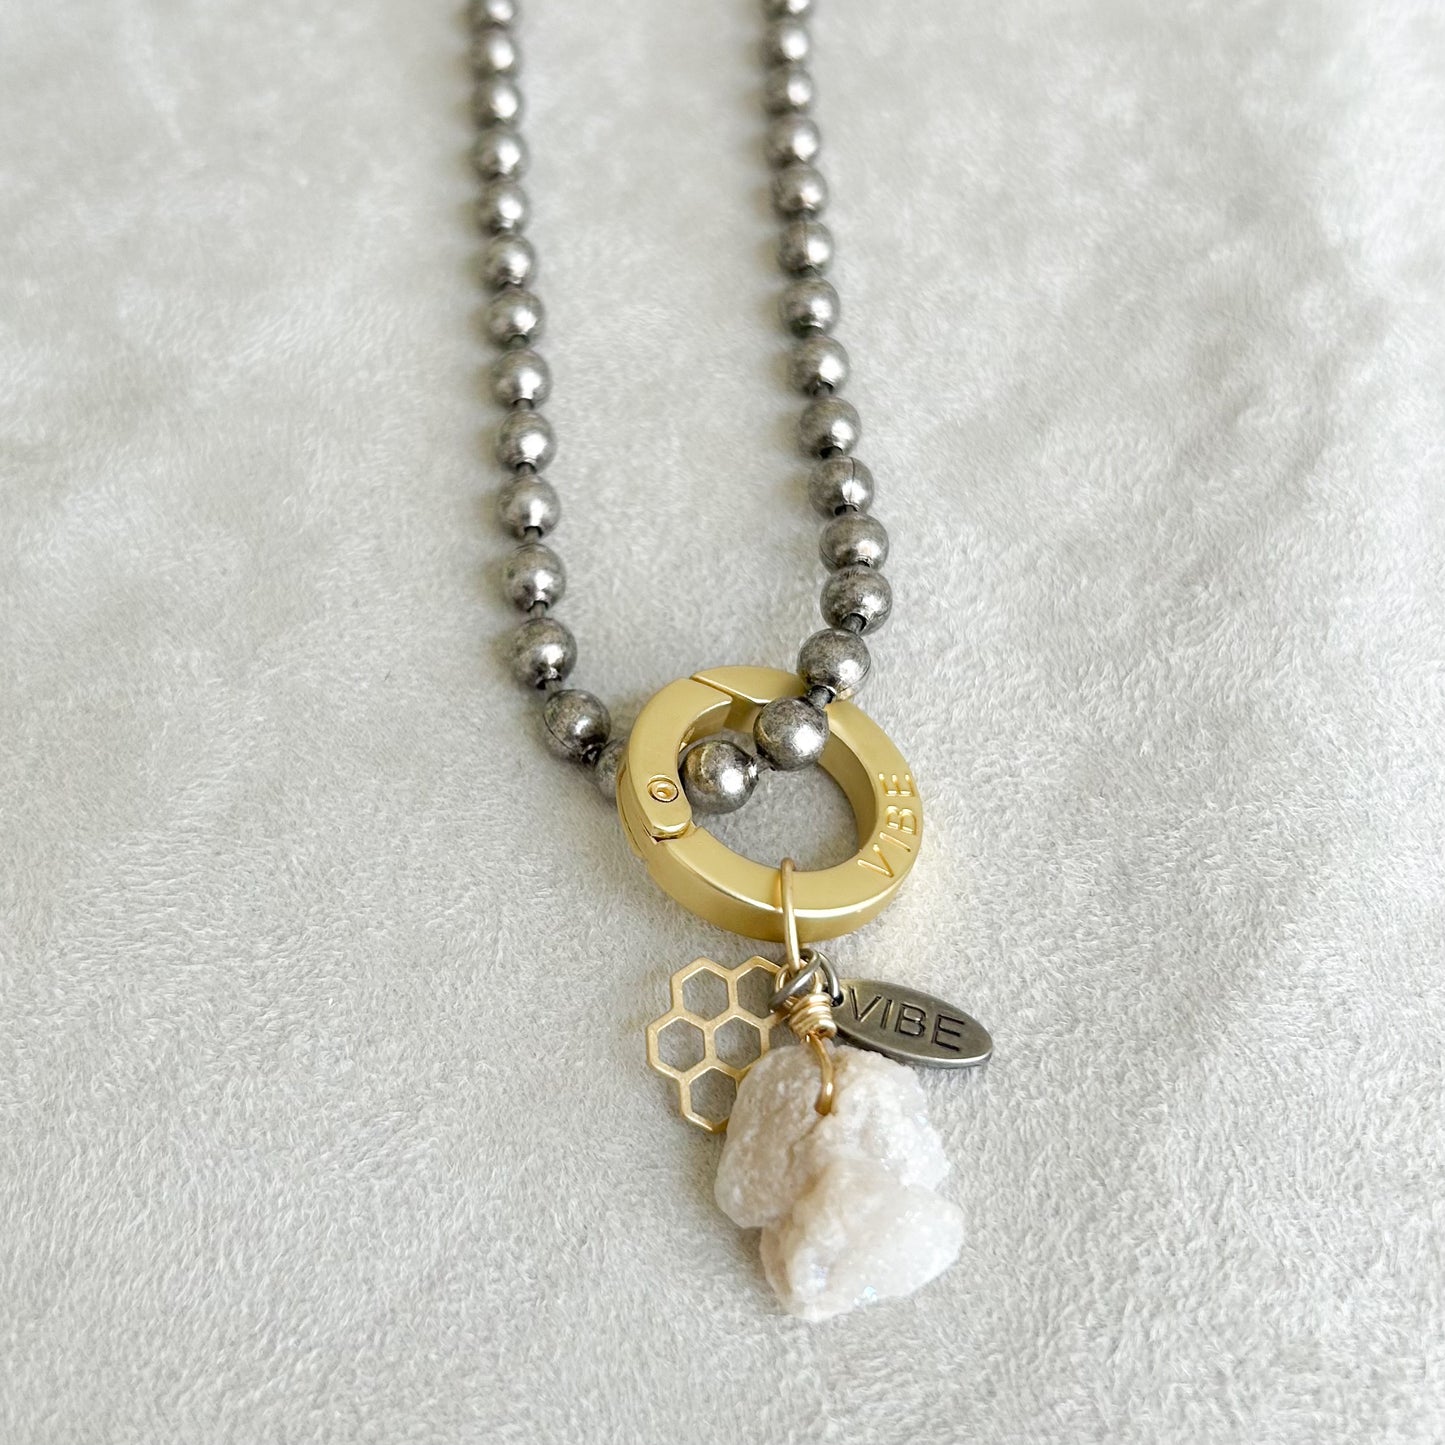 Thrive Hive Necklace